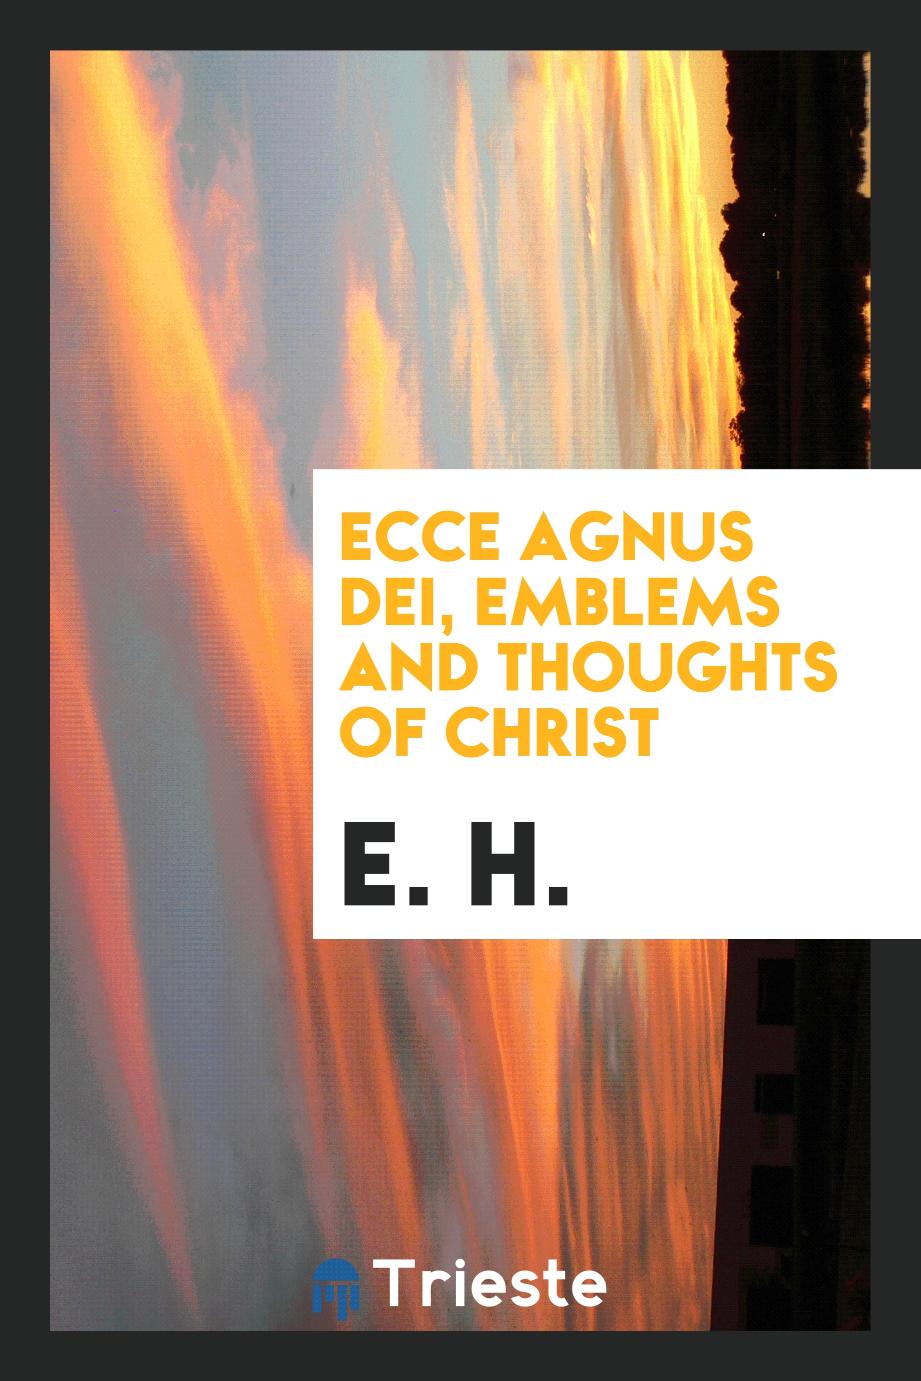 Ecce Agnus Dei, emblems and thoughts of Christ